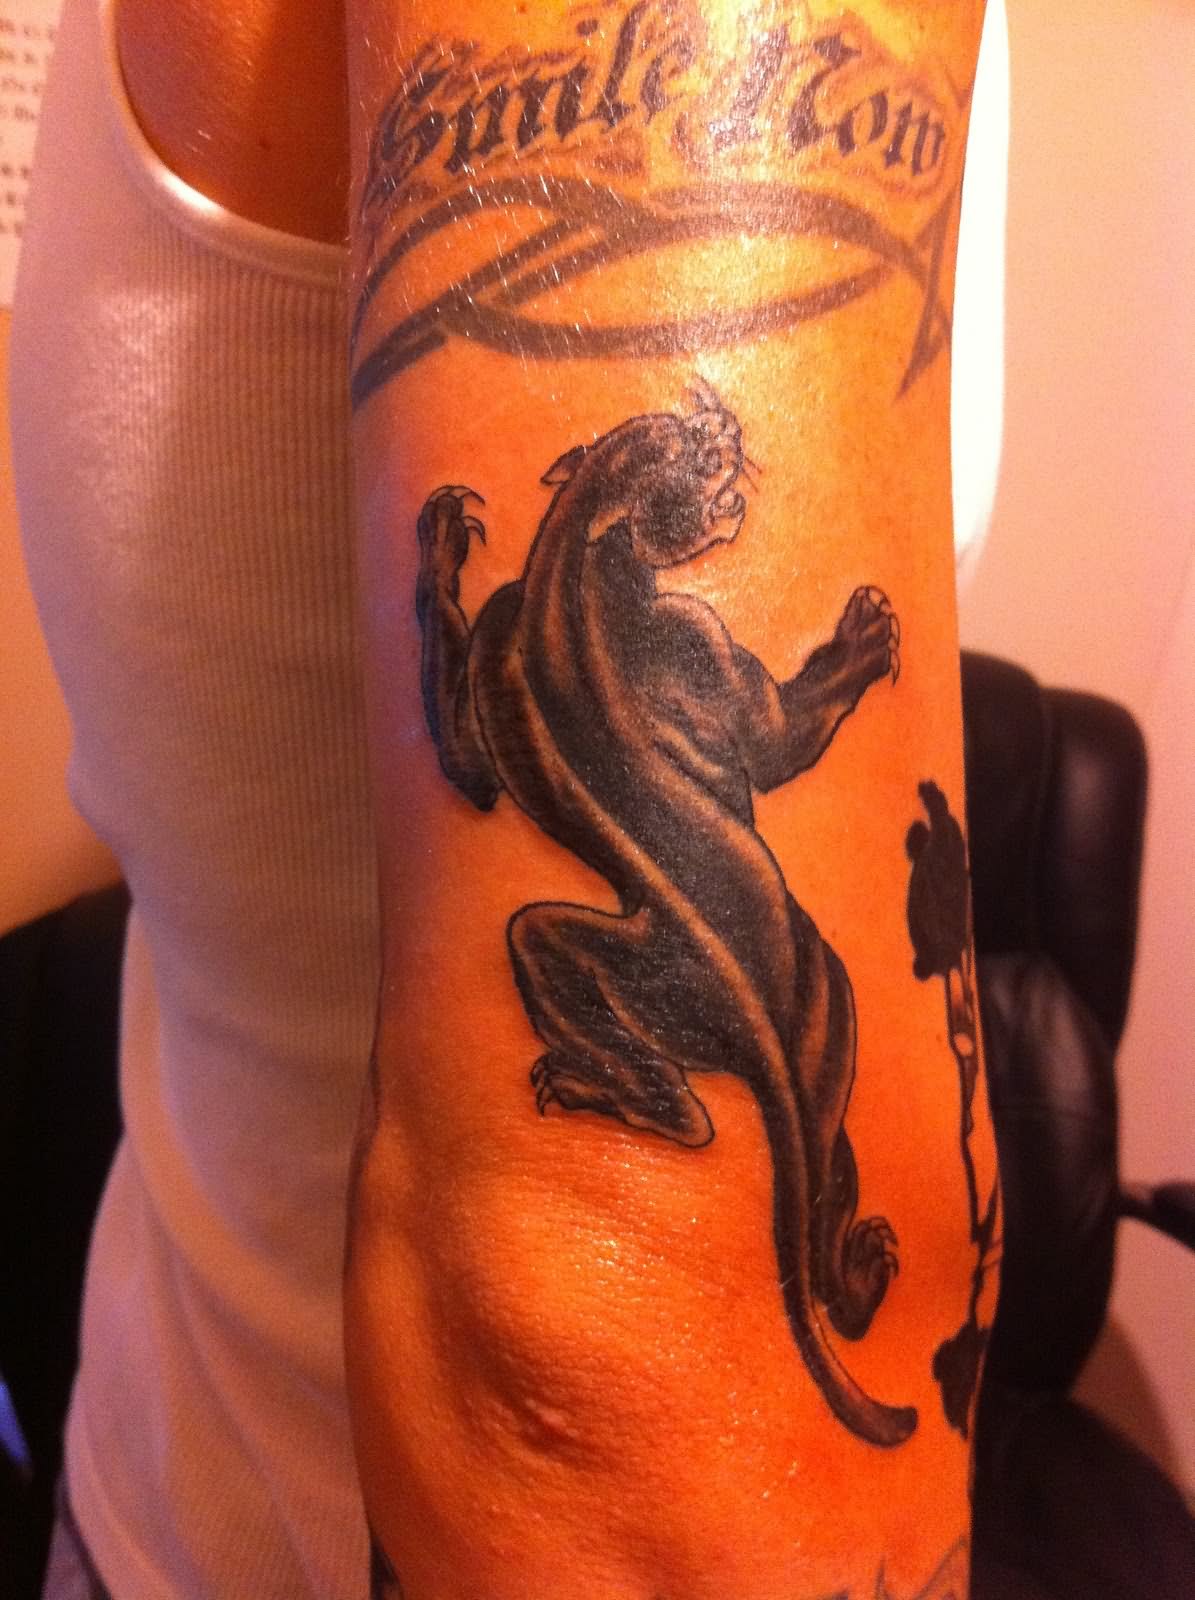 Black Panther Tattoo On Right Half Sleeve